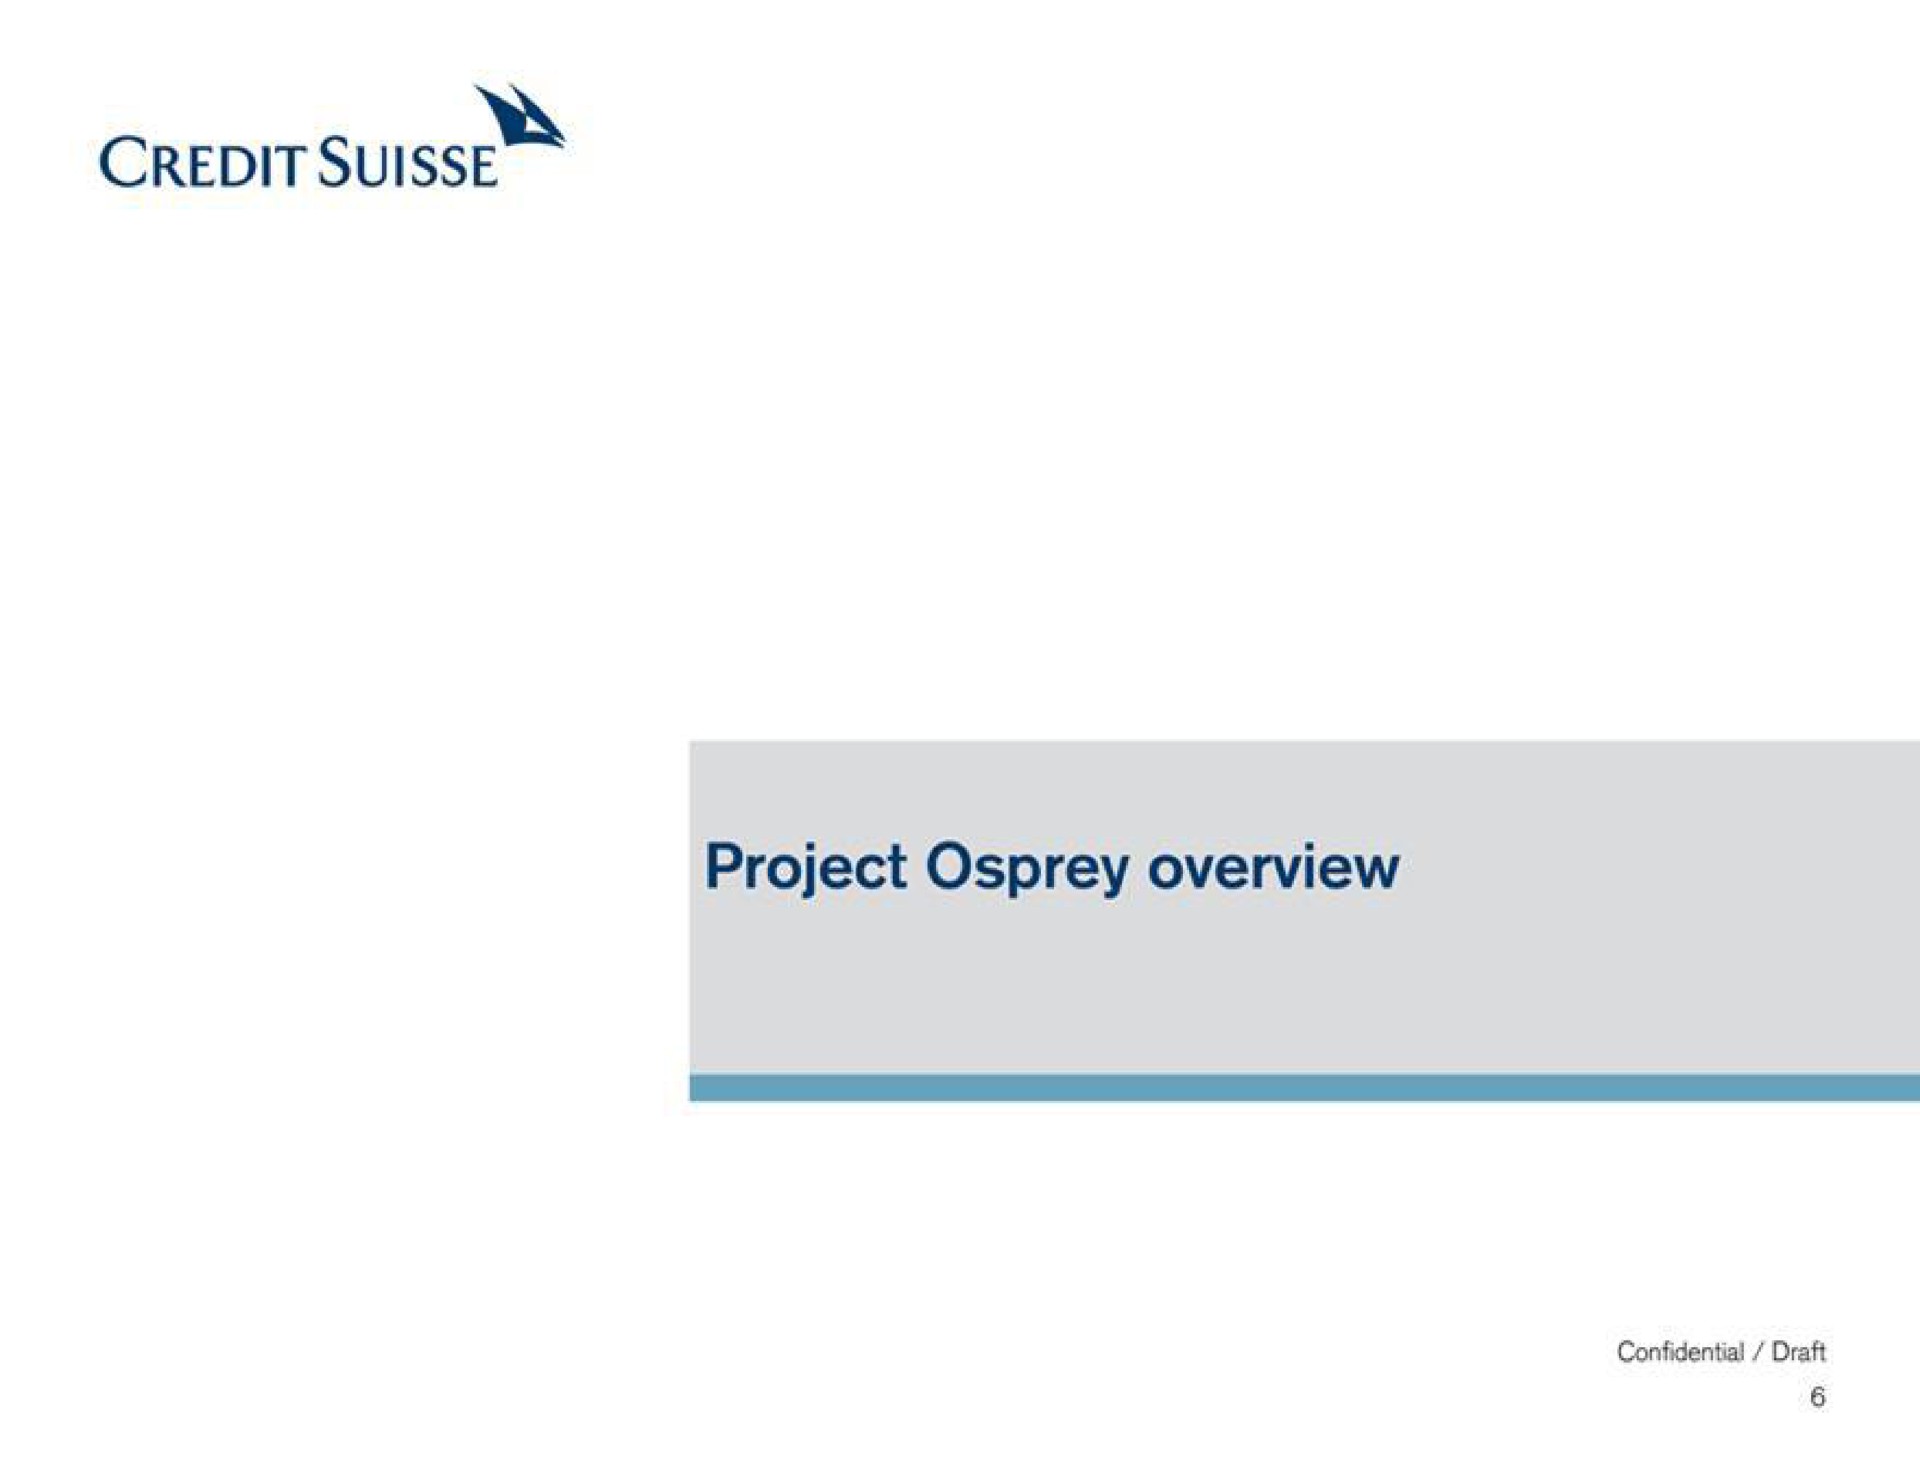 credit project osprey overview | Credit Suisse